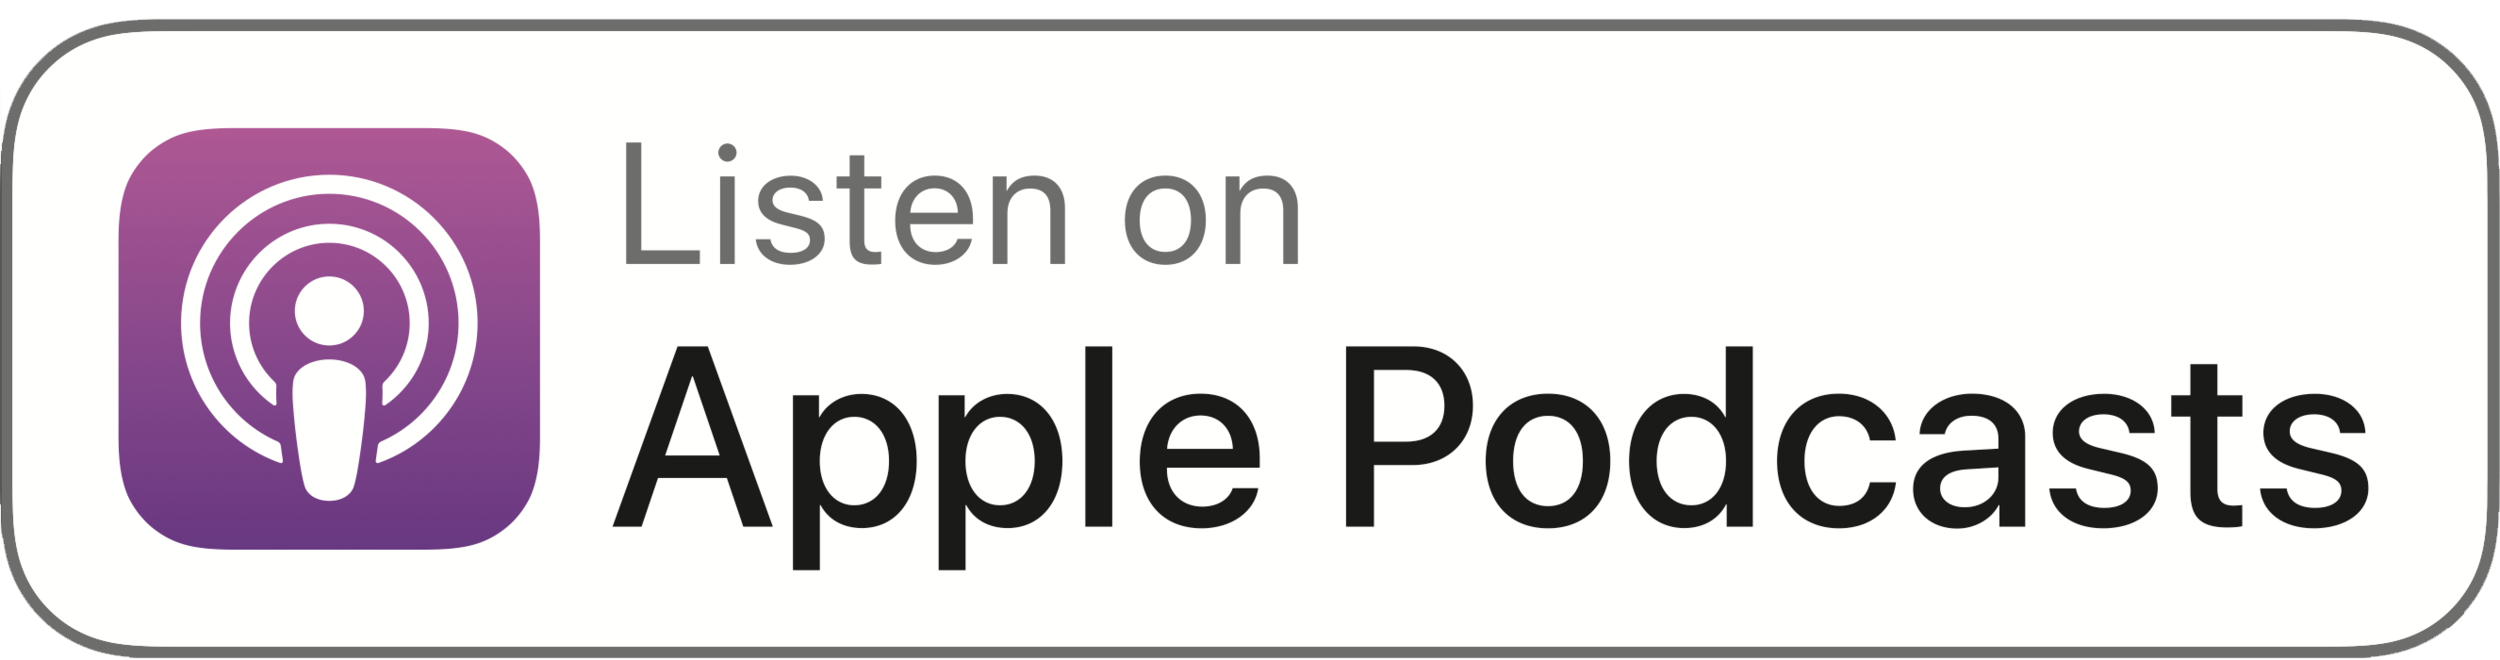 apple-podcast-png-who-is-a-brian-this-experiment-attempts-to-answer-brian-questions-by-having-a-brian-interview-other-people-named-brian-it-s-a-podcast-and-now-2652-1.png